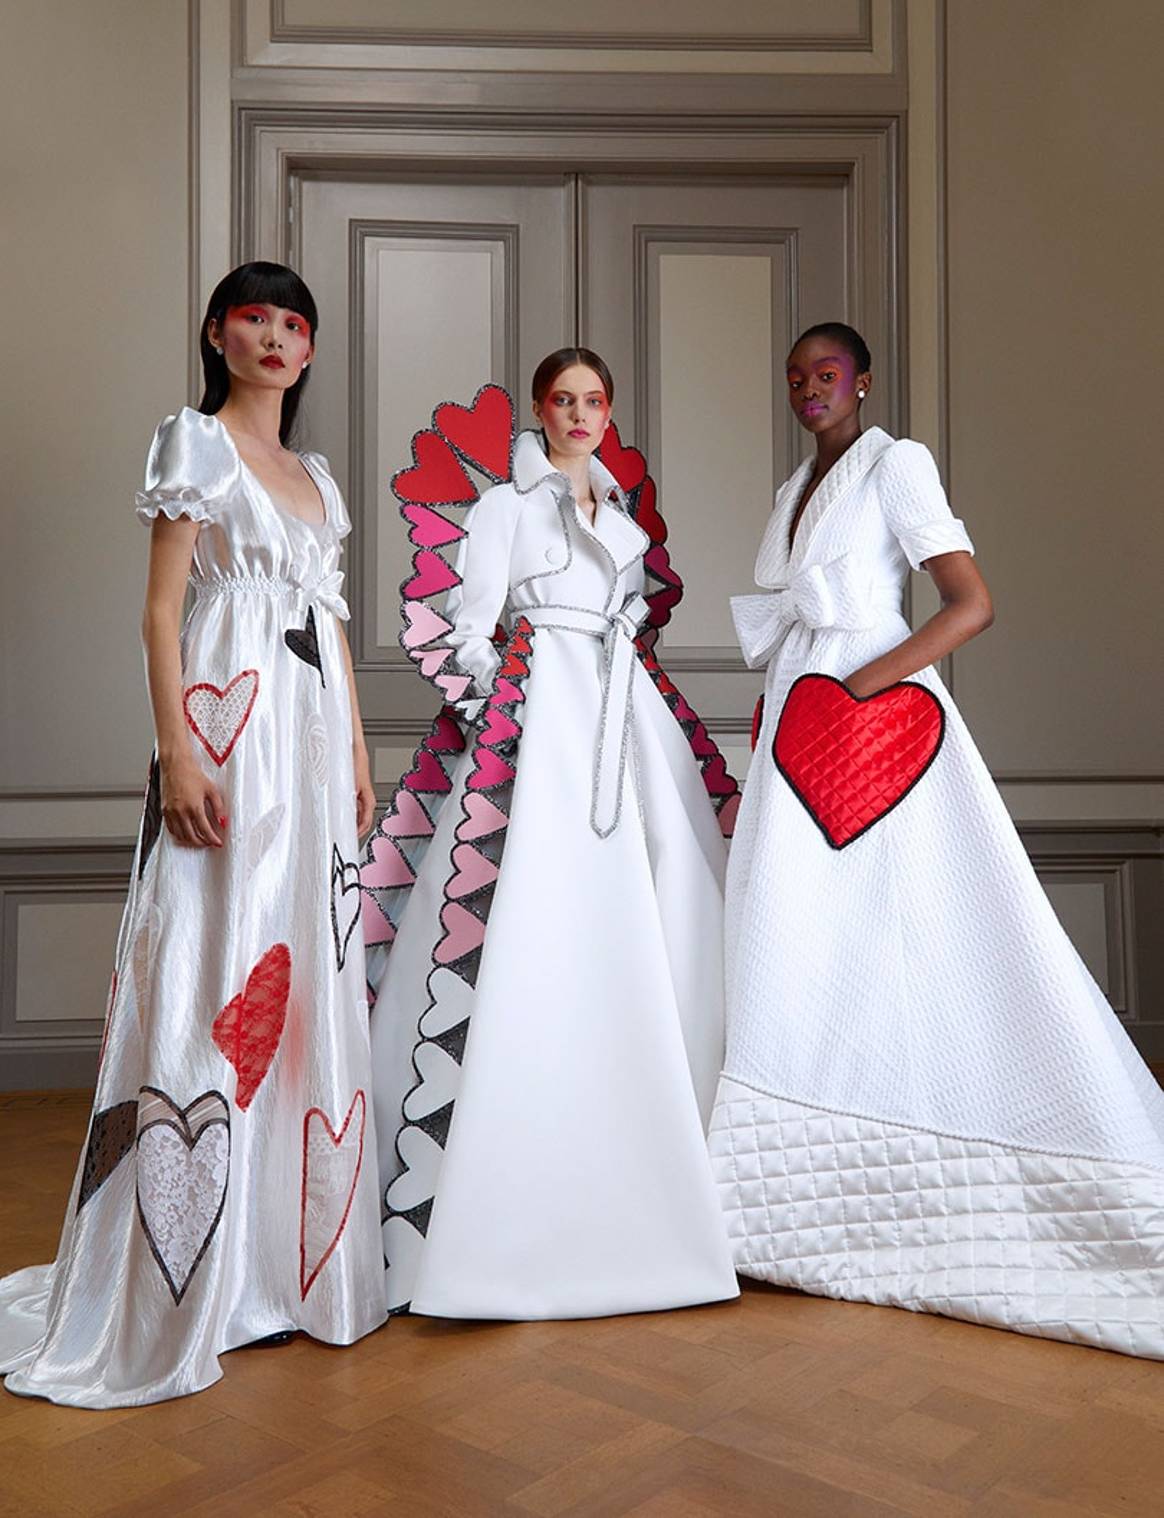 Viktor and Rolf embraces coronavirus for haute couture